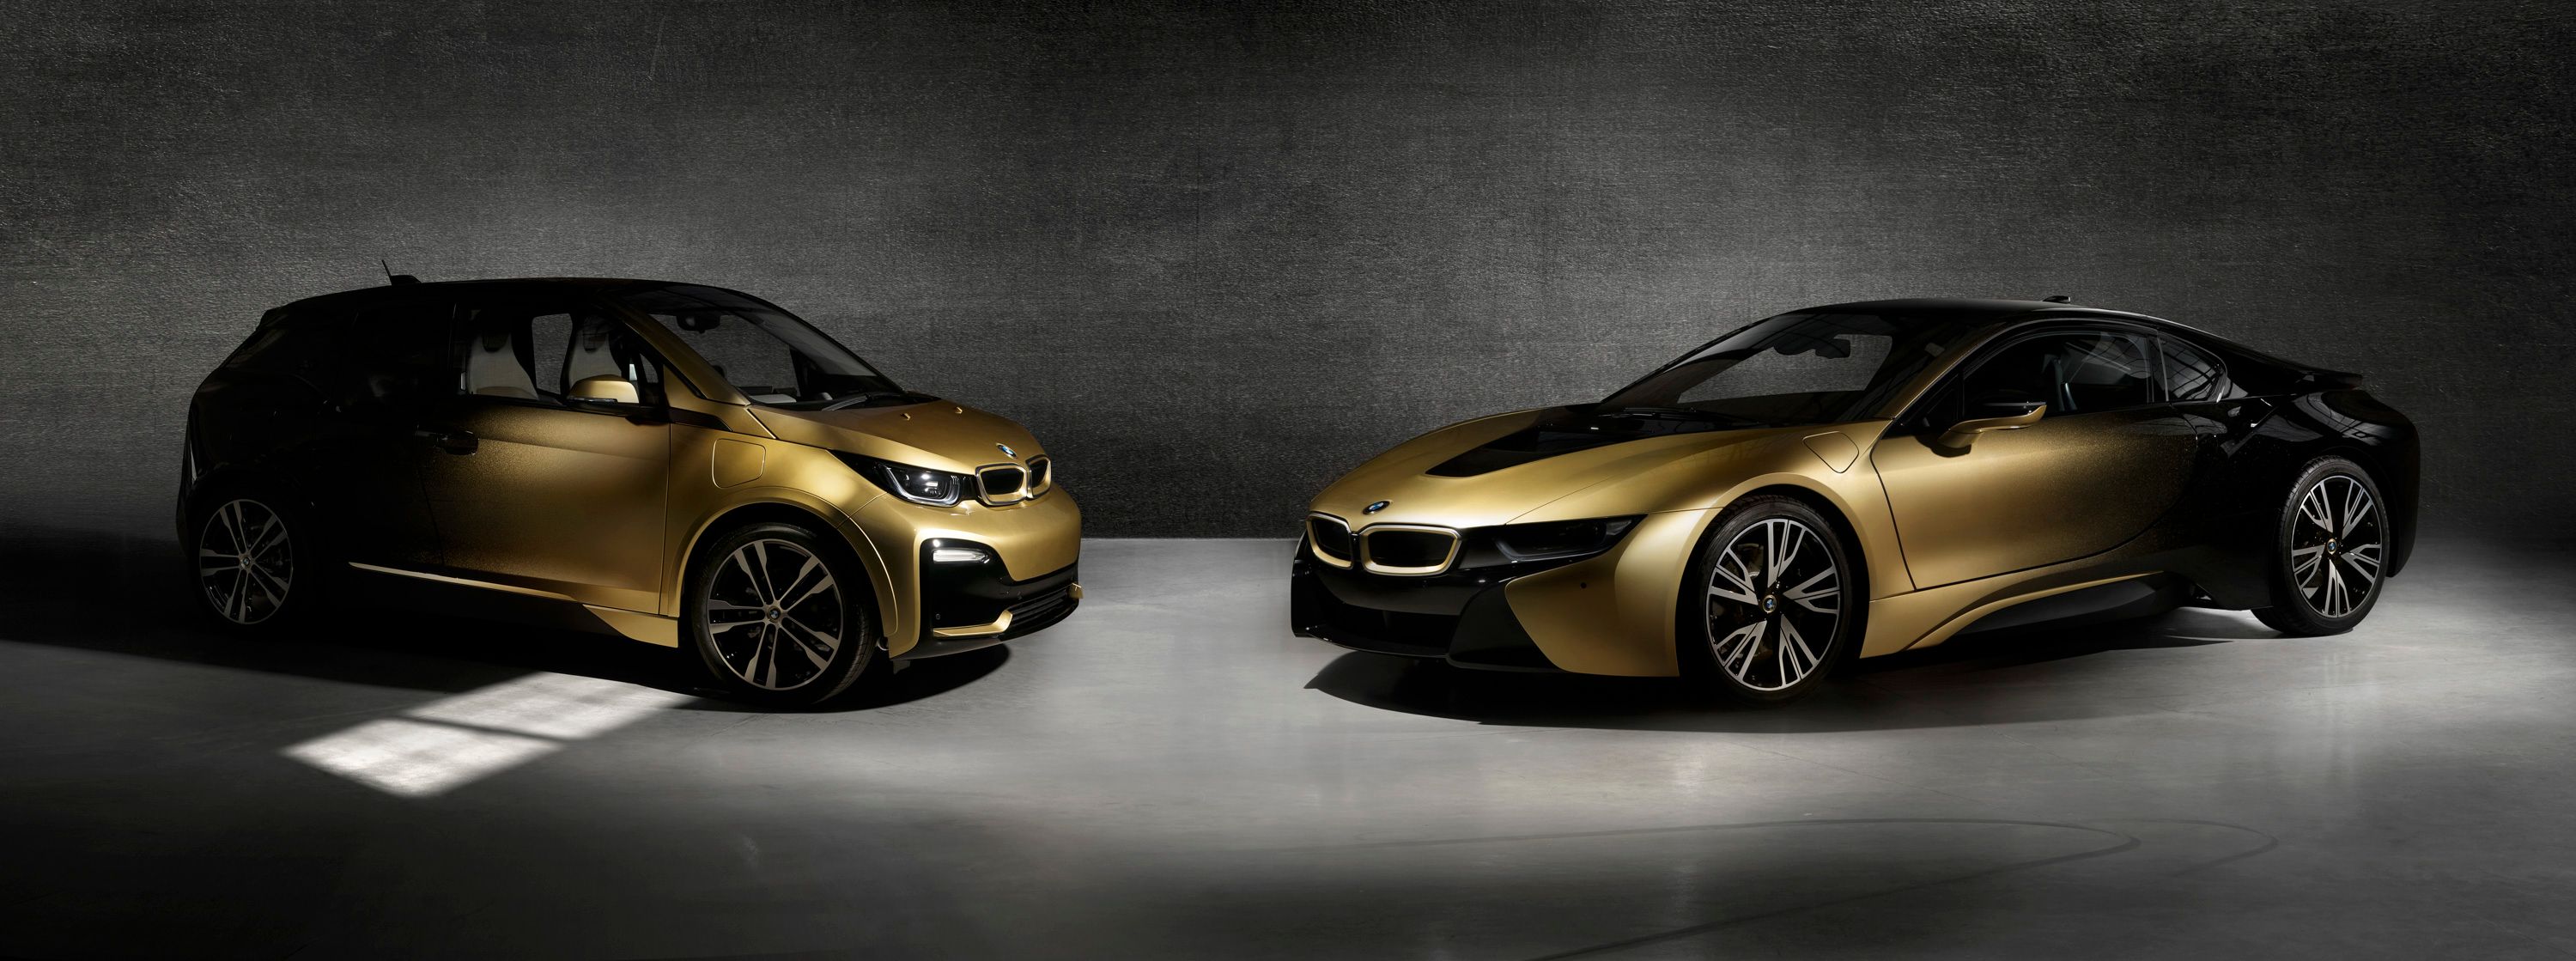 2019 Golden BMW i3 And i8 Starlight Edition Revealed